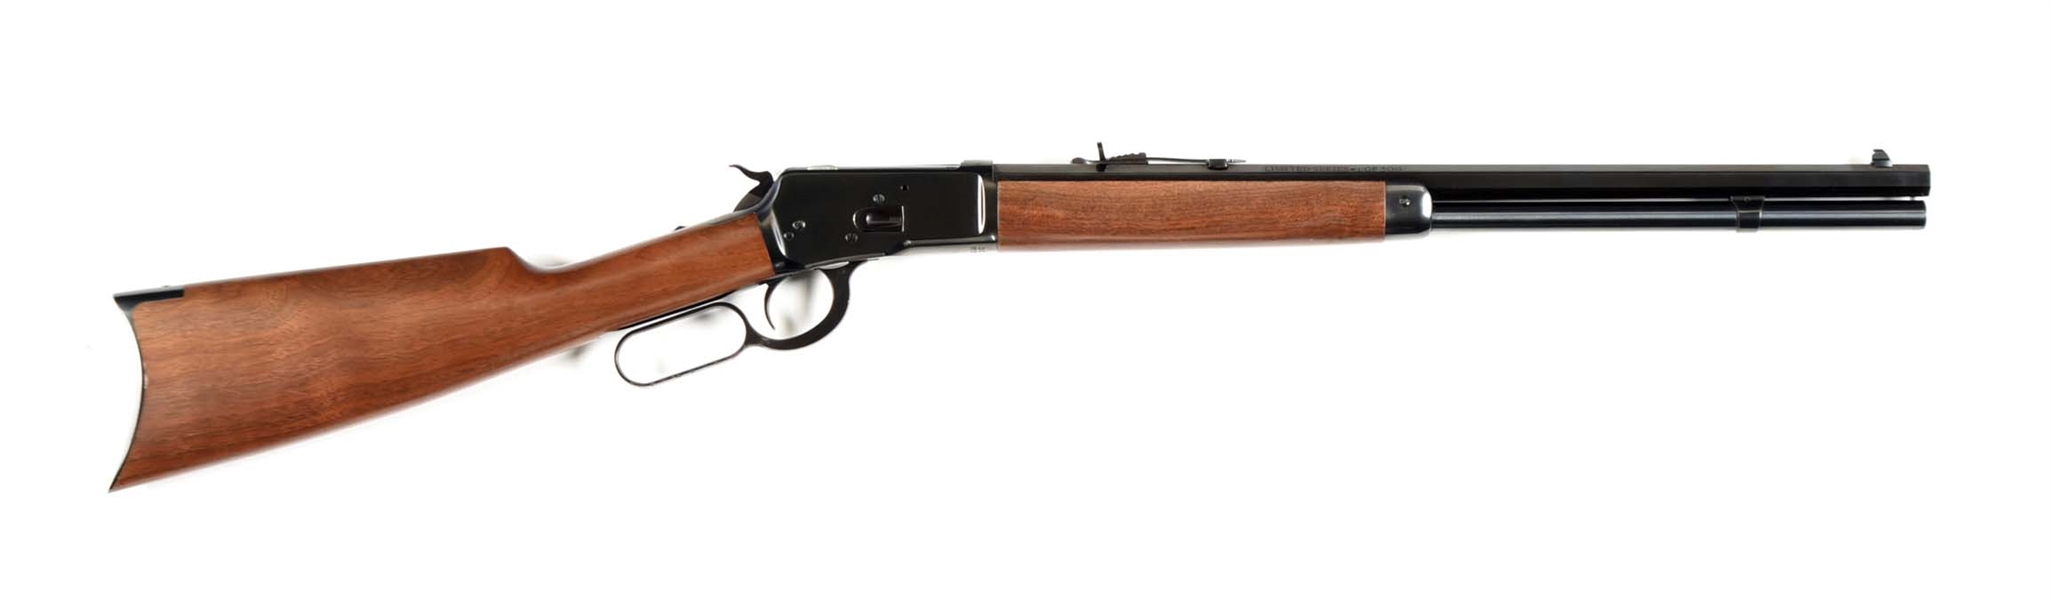 (M) WINCHESTER MODEL 1892 LIMITED SERIES LEVER ACTION RIFLE IN .45 COLT.